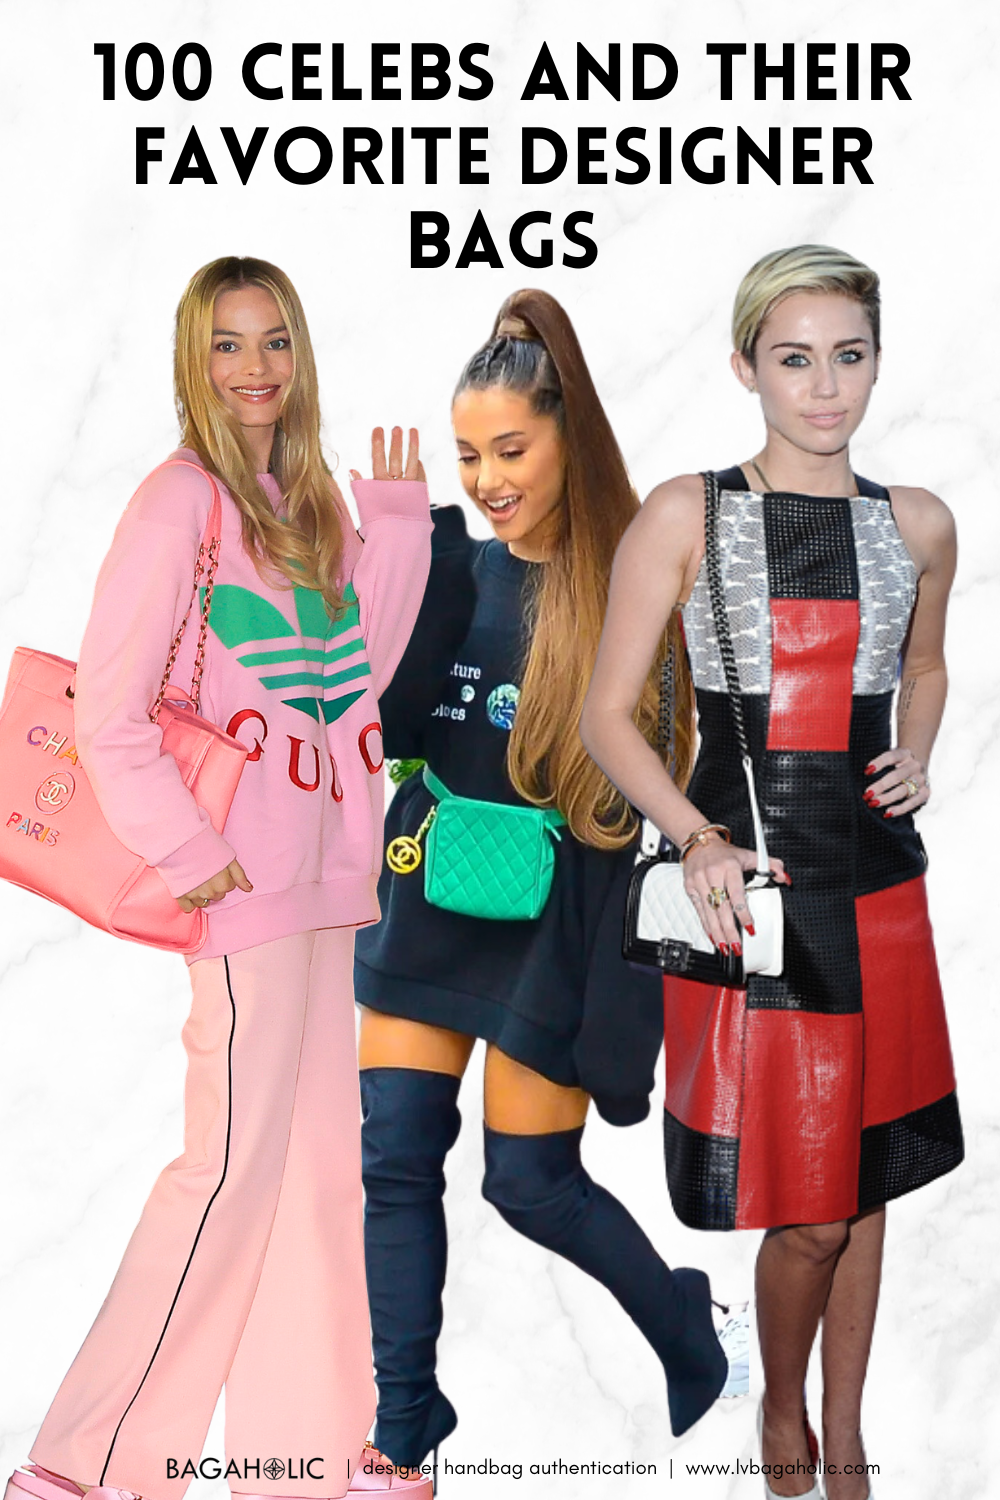 100 CELEBS AND THEIR FAVORITE DESIGNER BAGS